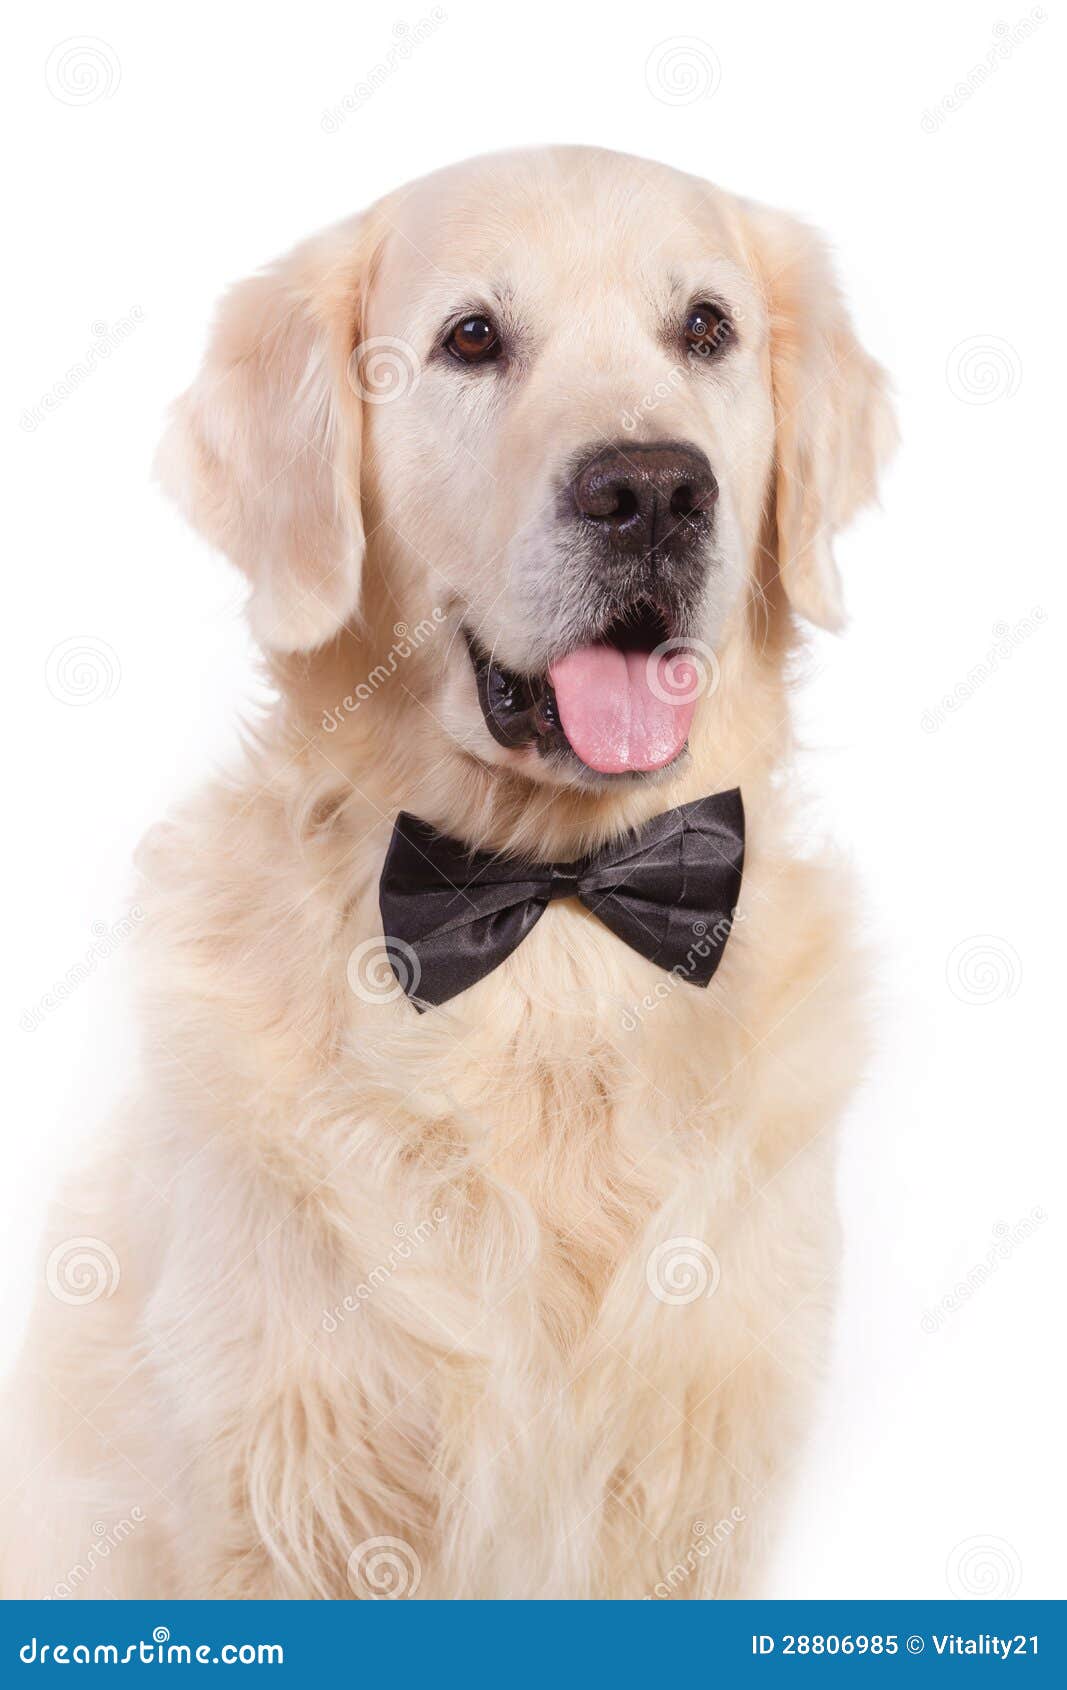 Dog with bow tie stock image. Image of domestic